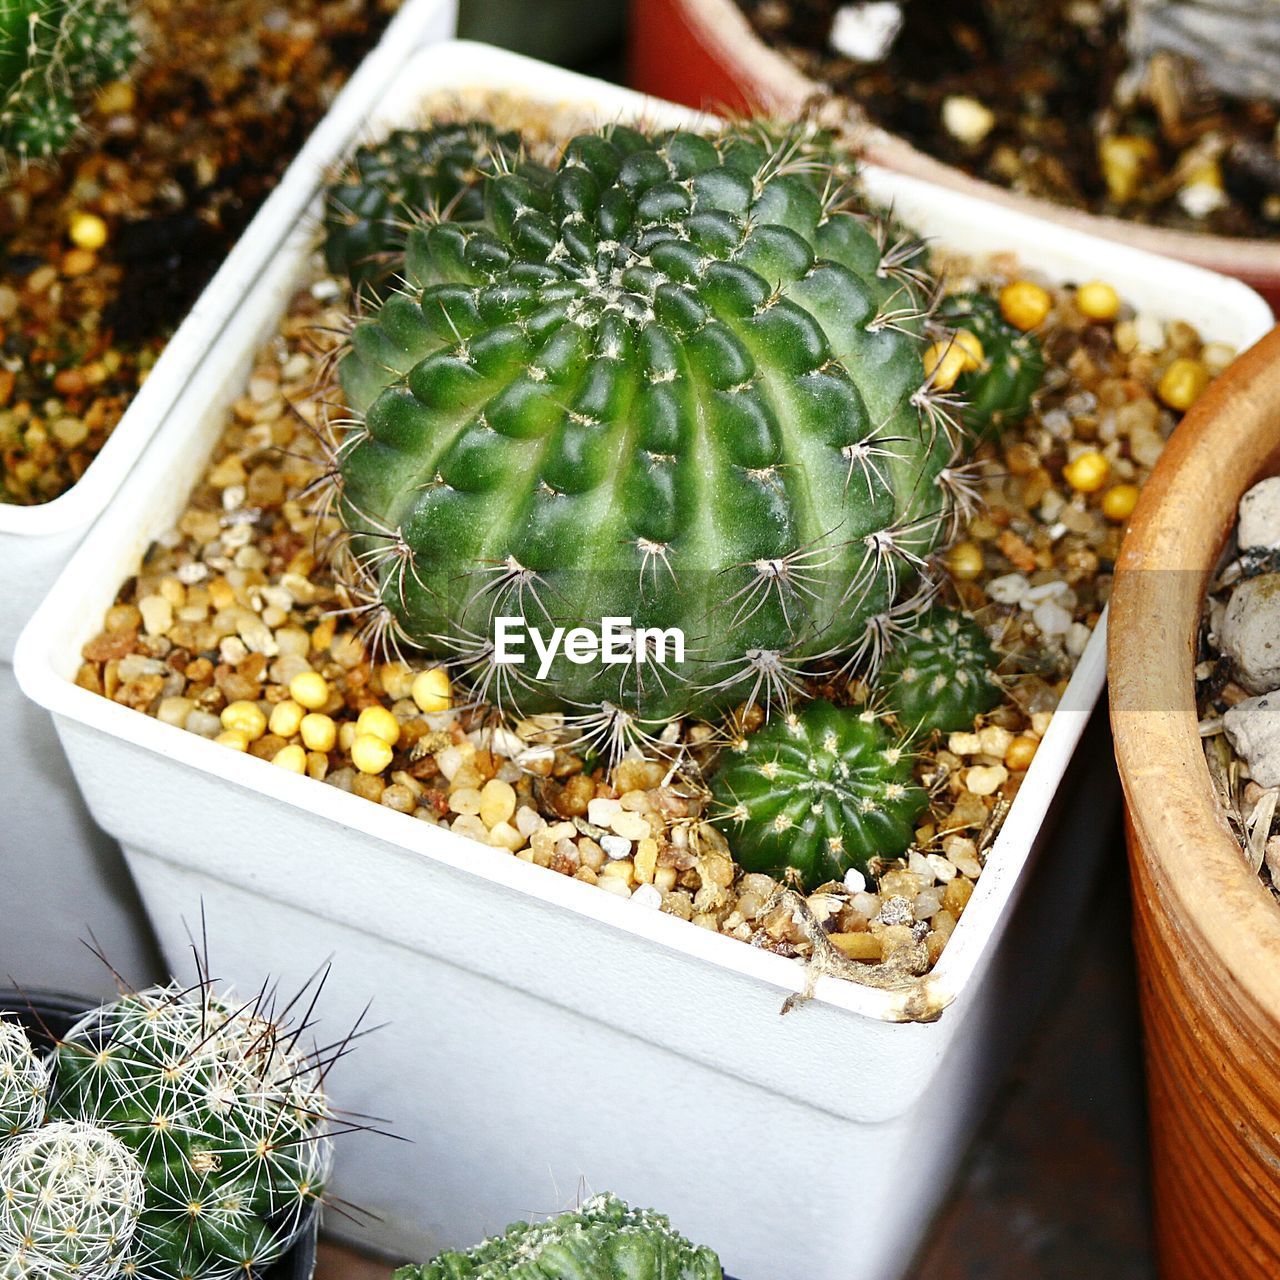 HIGH ANGLE VIEW OF CACTUS GROWING IN POTTED PLANT